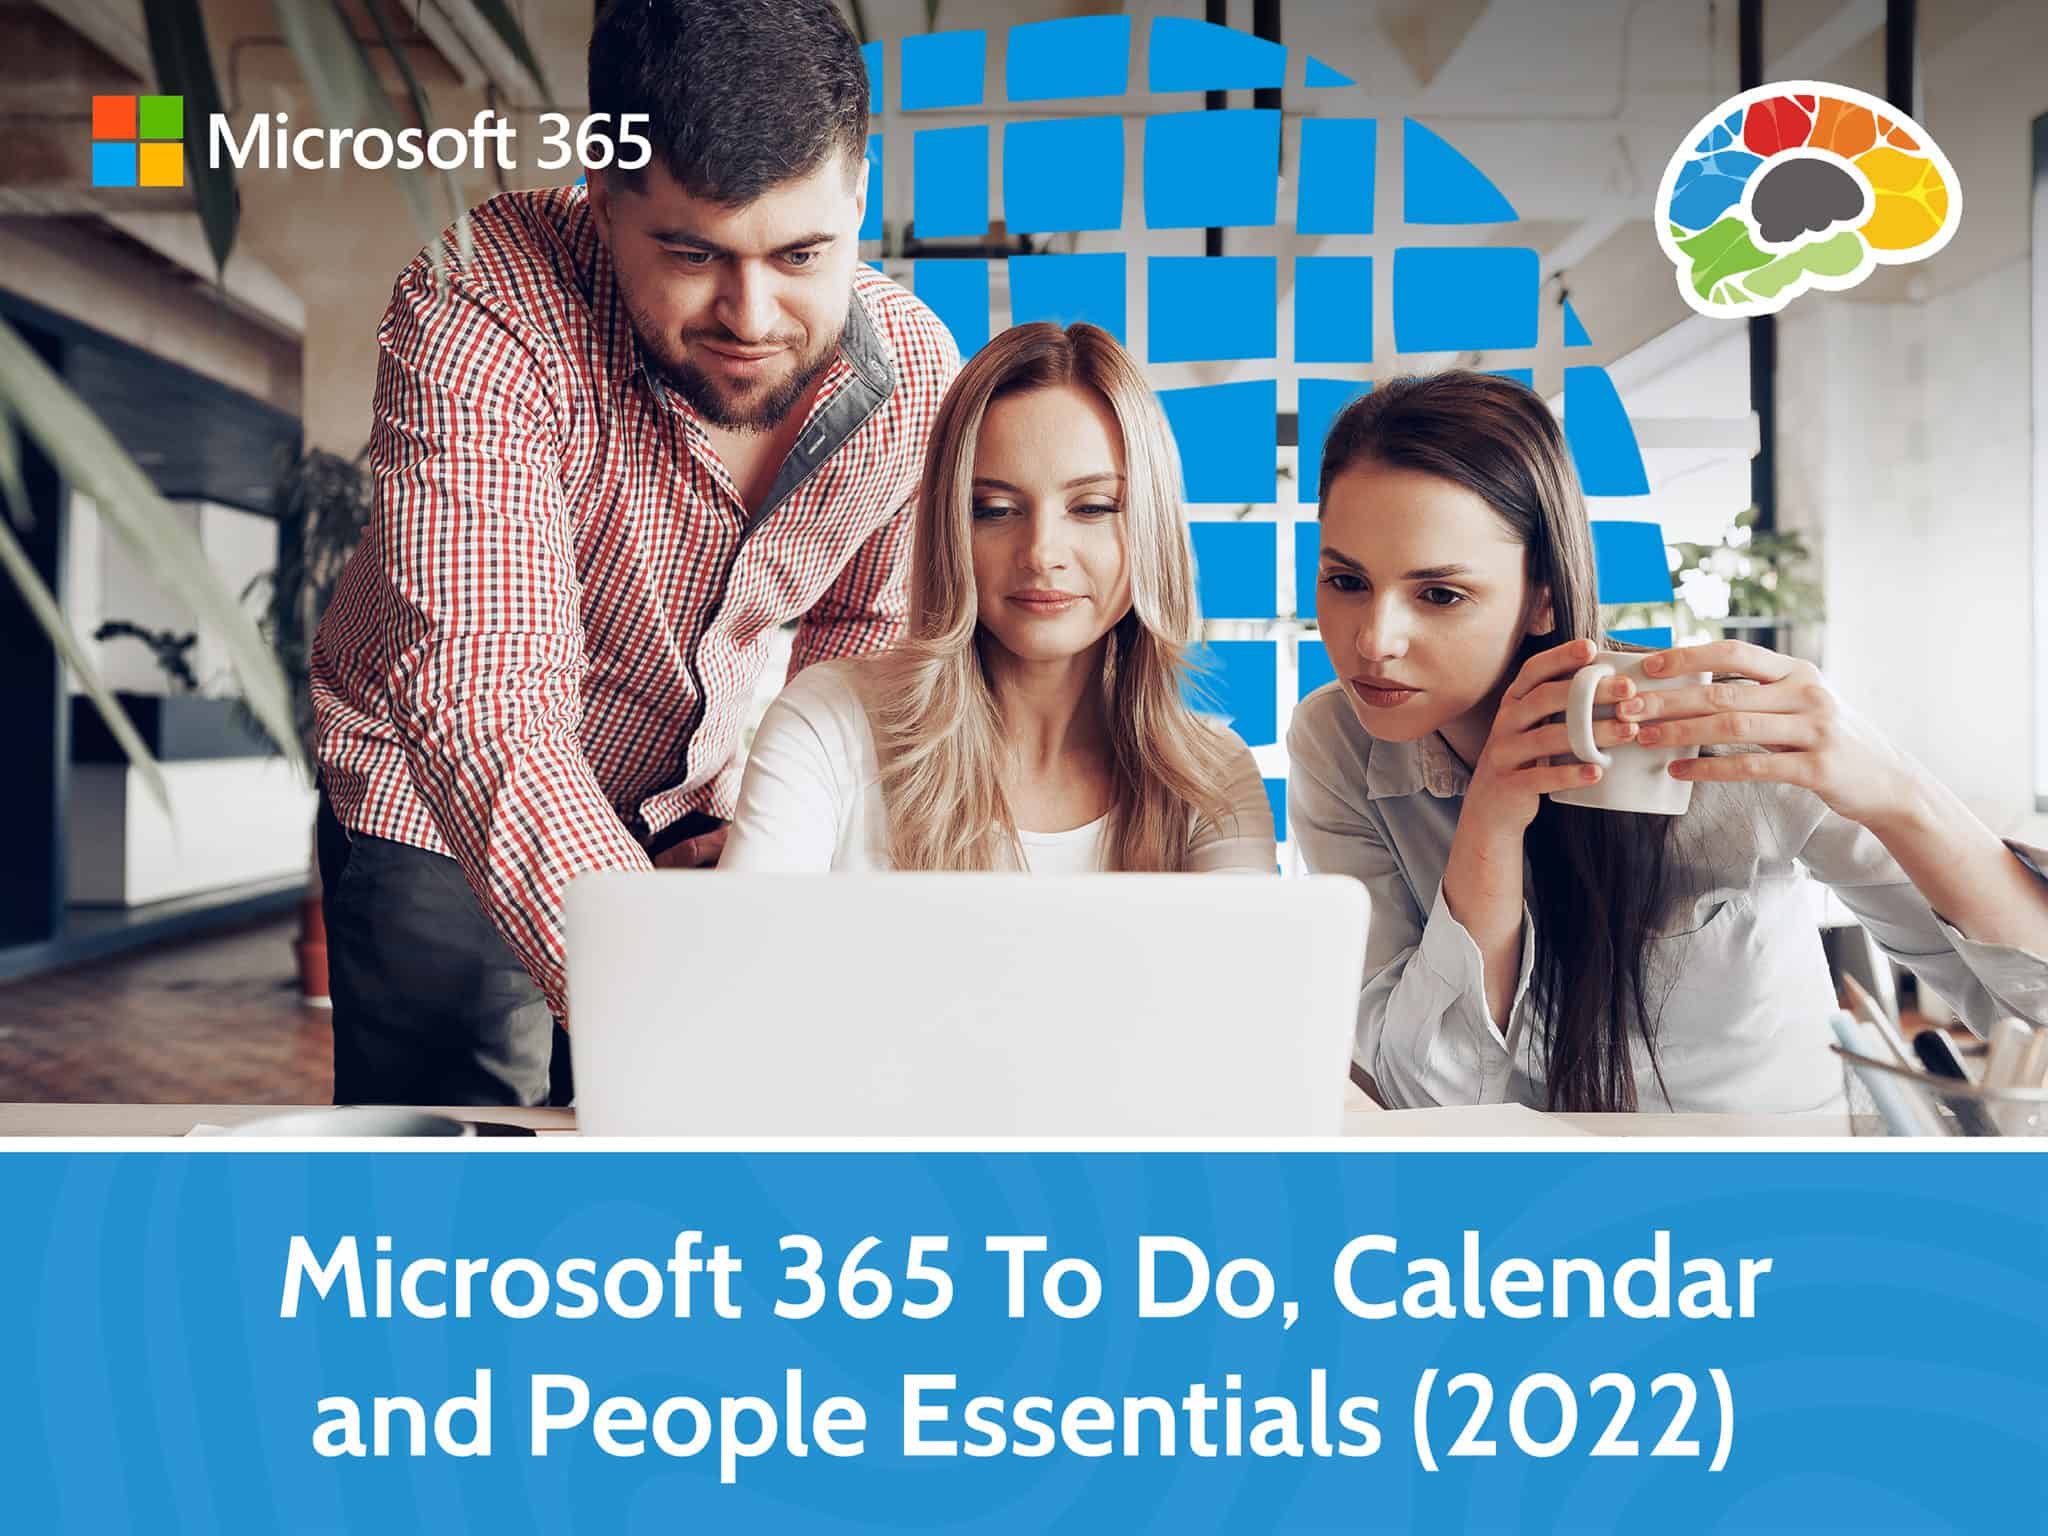 Microsoft 365 To Do Calendar and People Essentials 2022 scaled